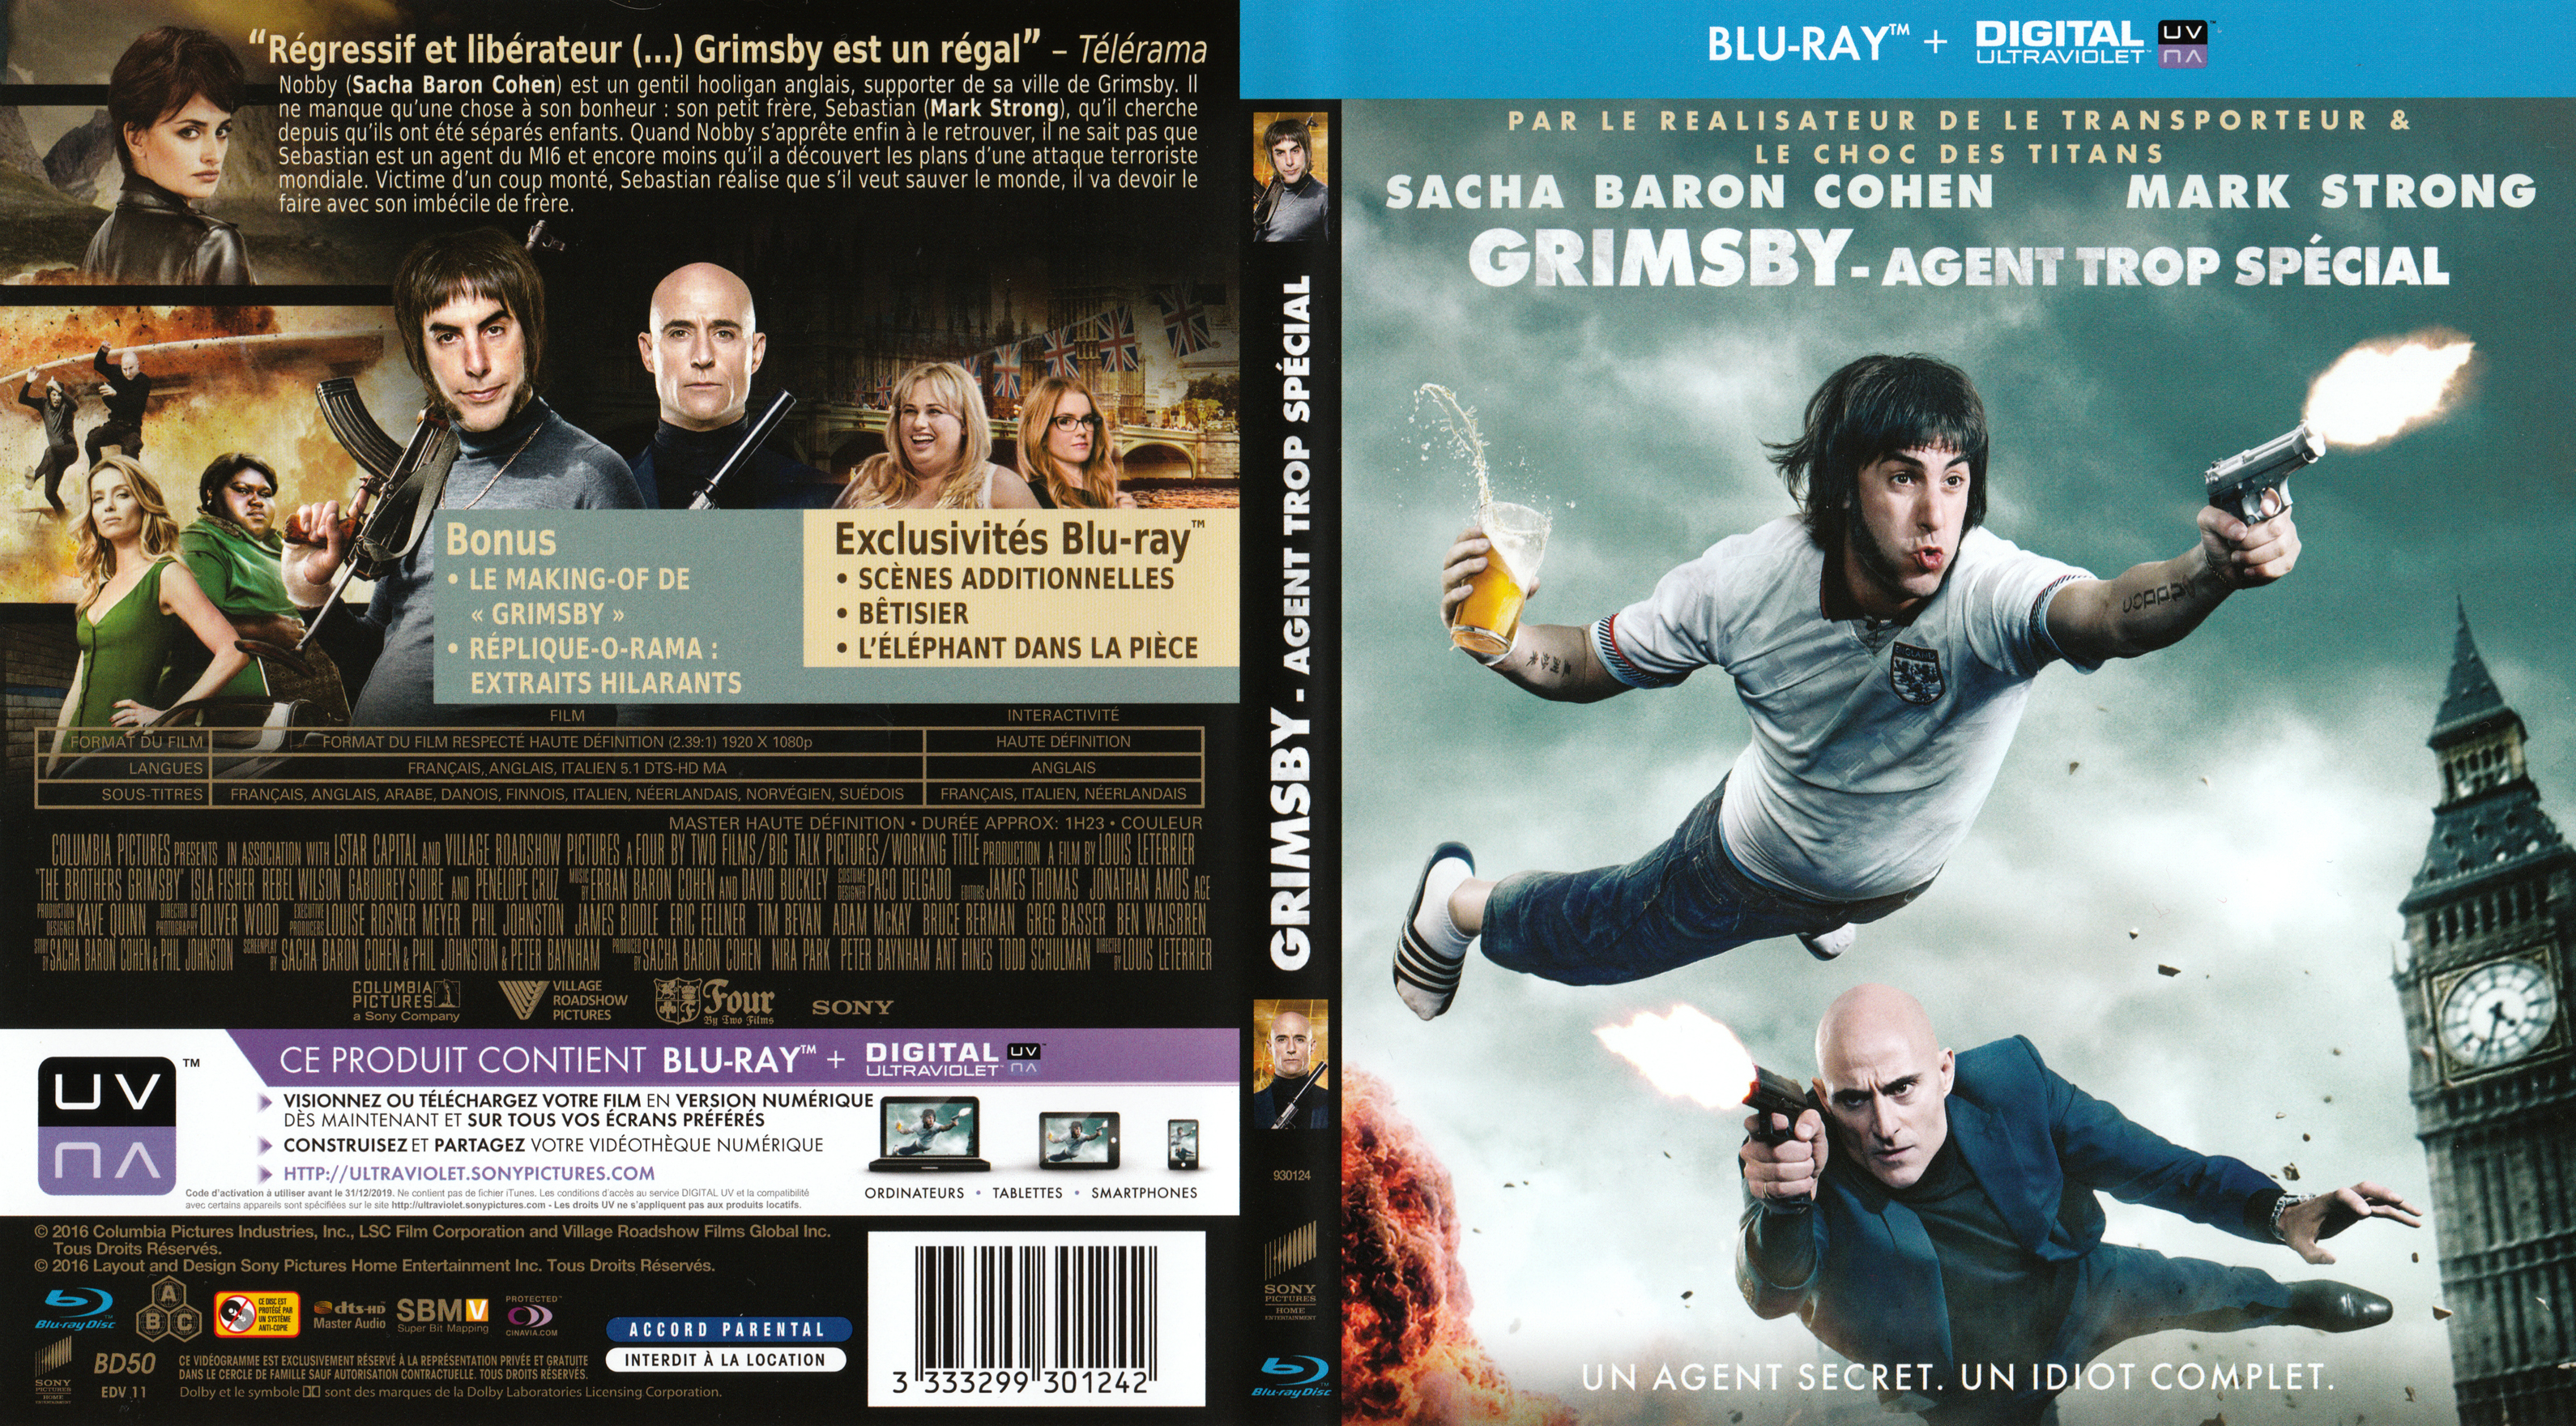 Jaquette DVD Grimsby Agent trop special (BLU-RAY)